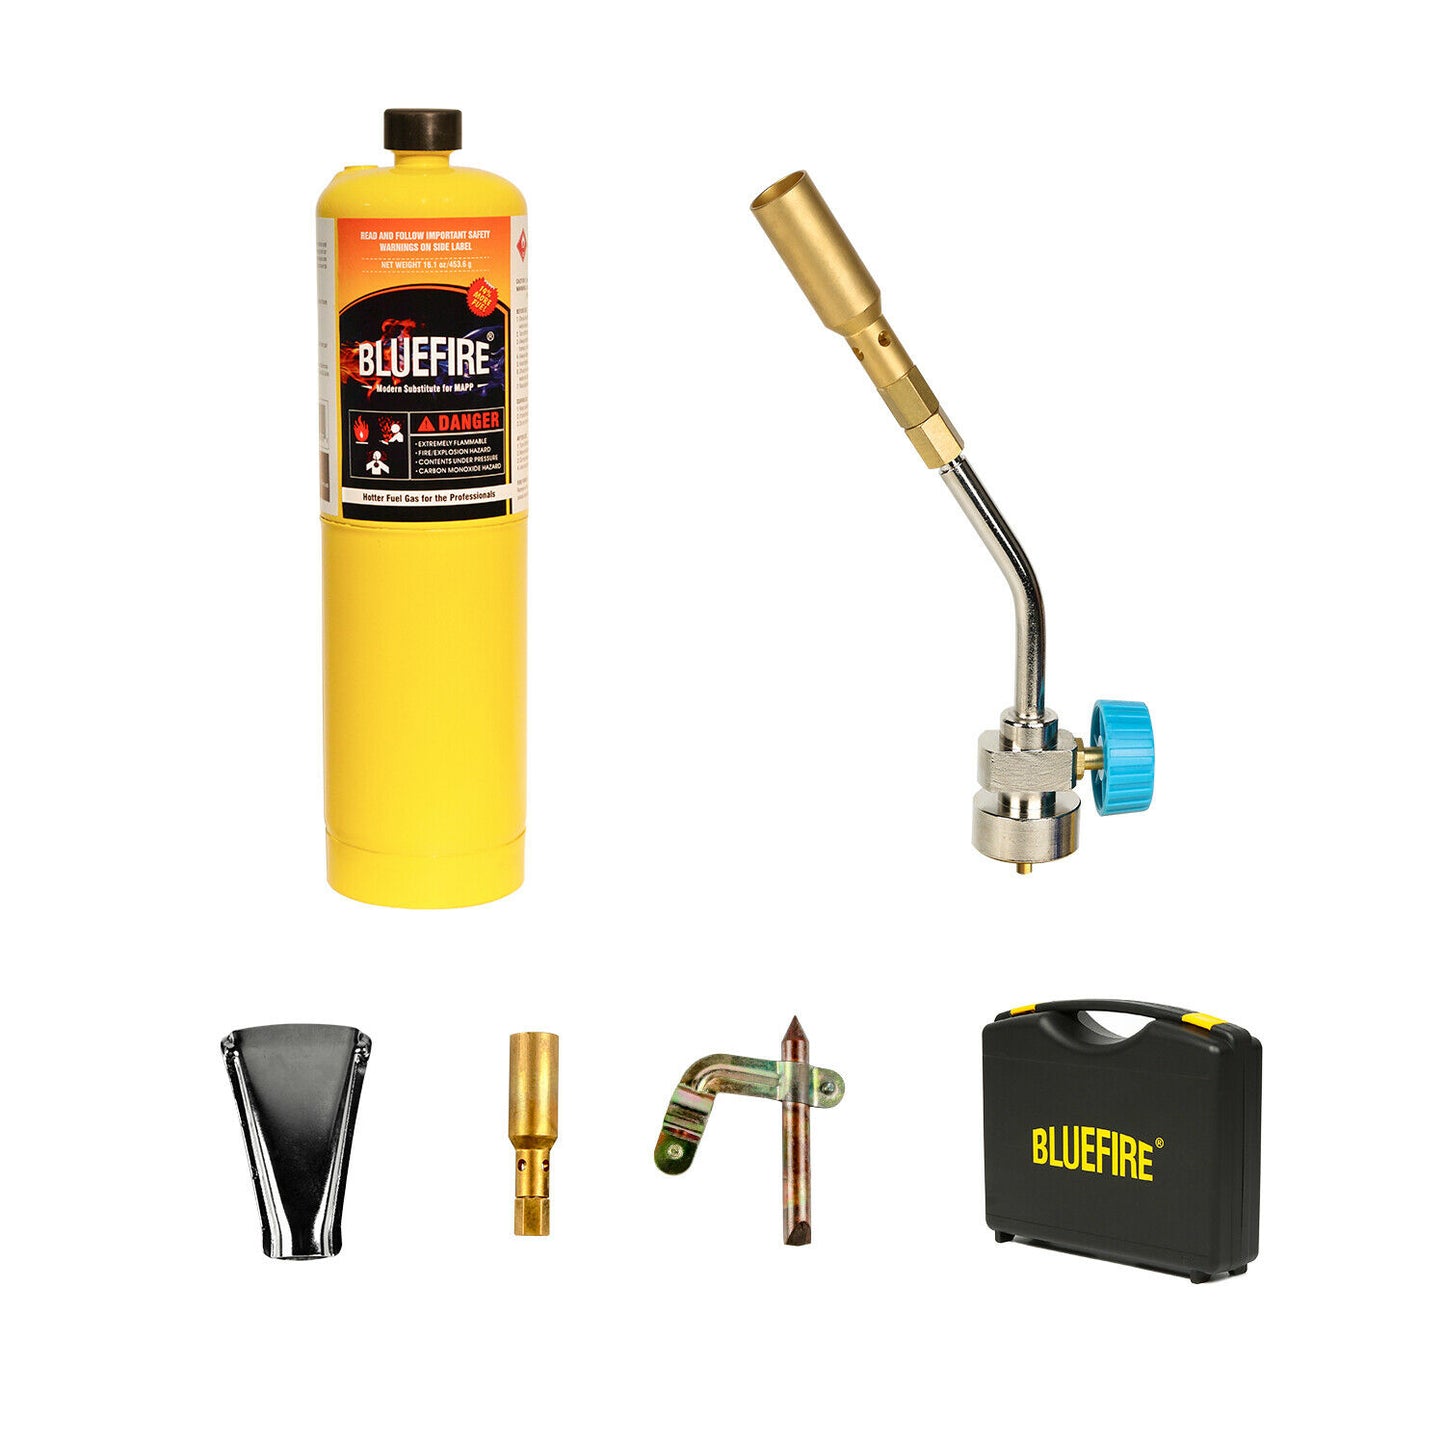 ‎BTM-7020-K Solid Brass Pencil Flame Gas Welding Torch Head with MAPP gas Kit